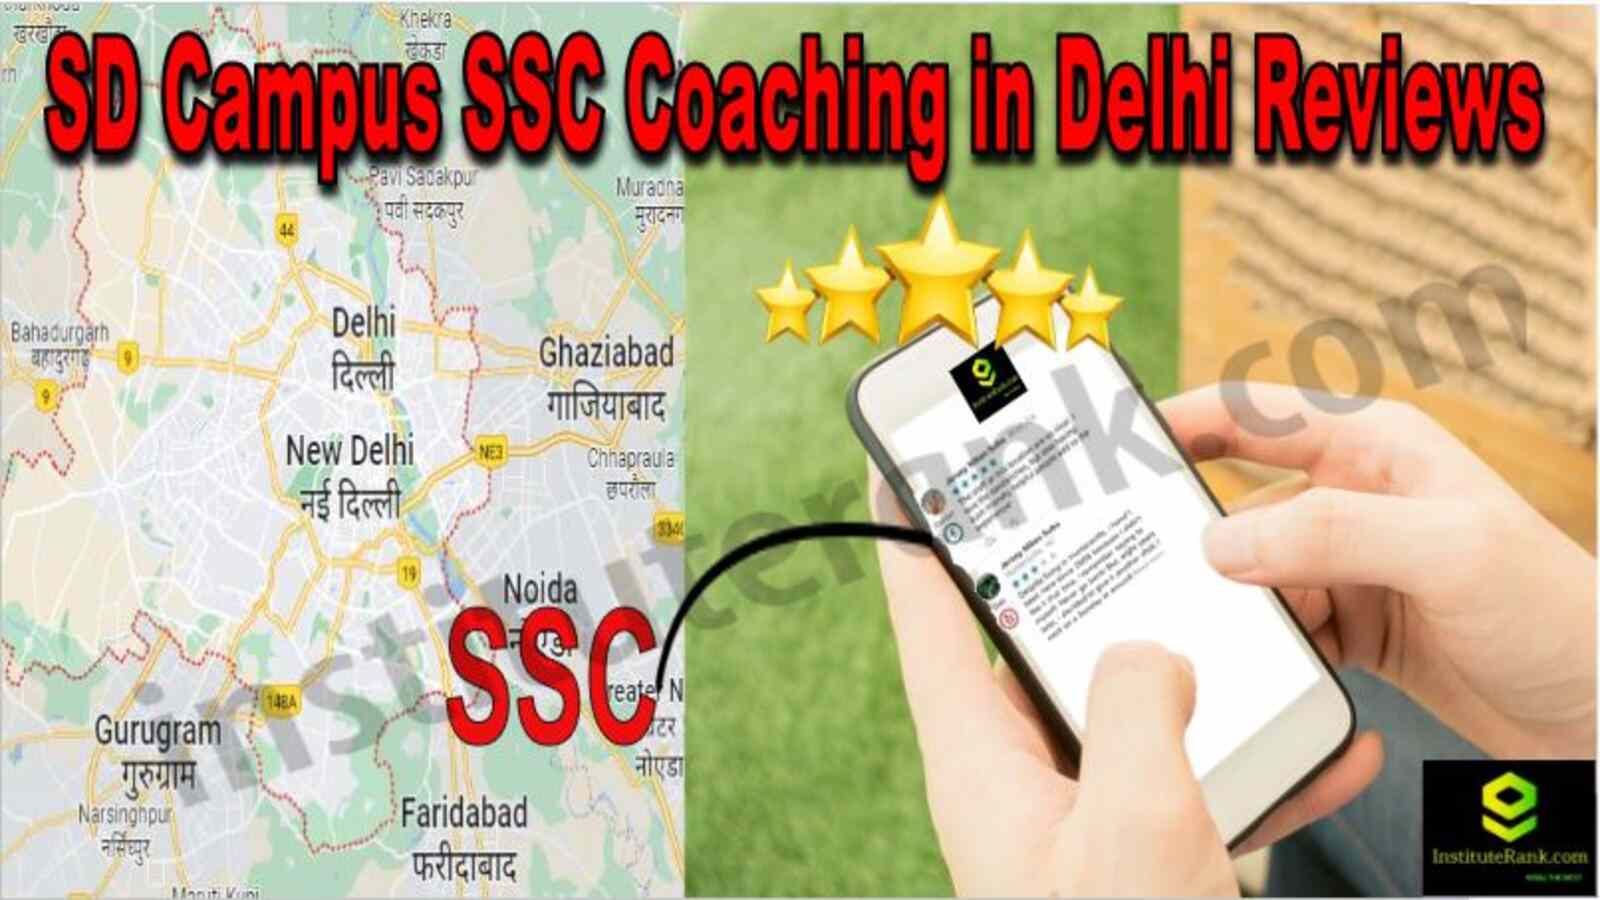 SD Campus SSC Coaching in Delhi Reviews